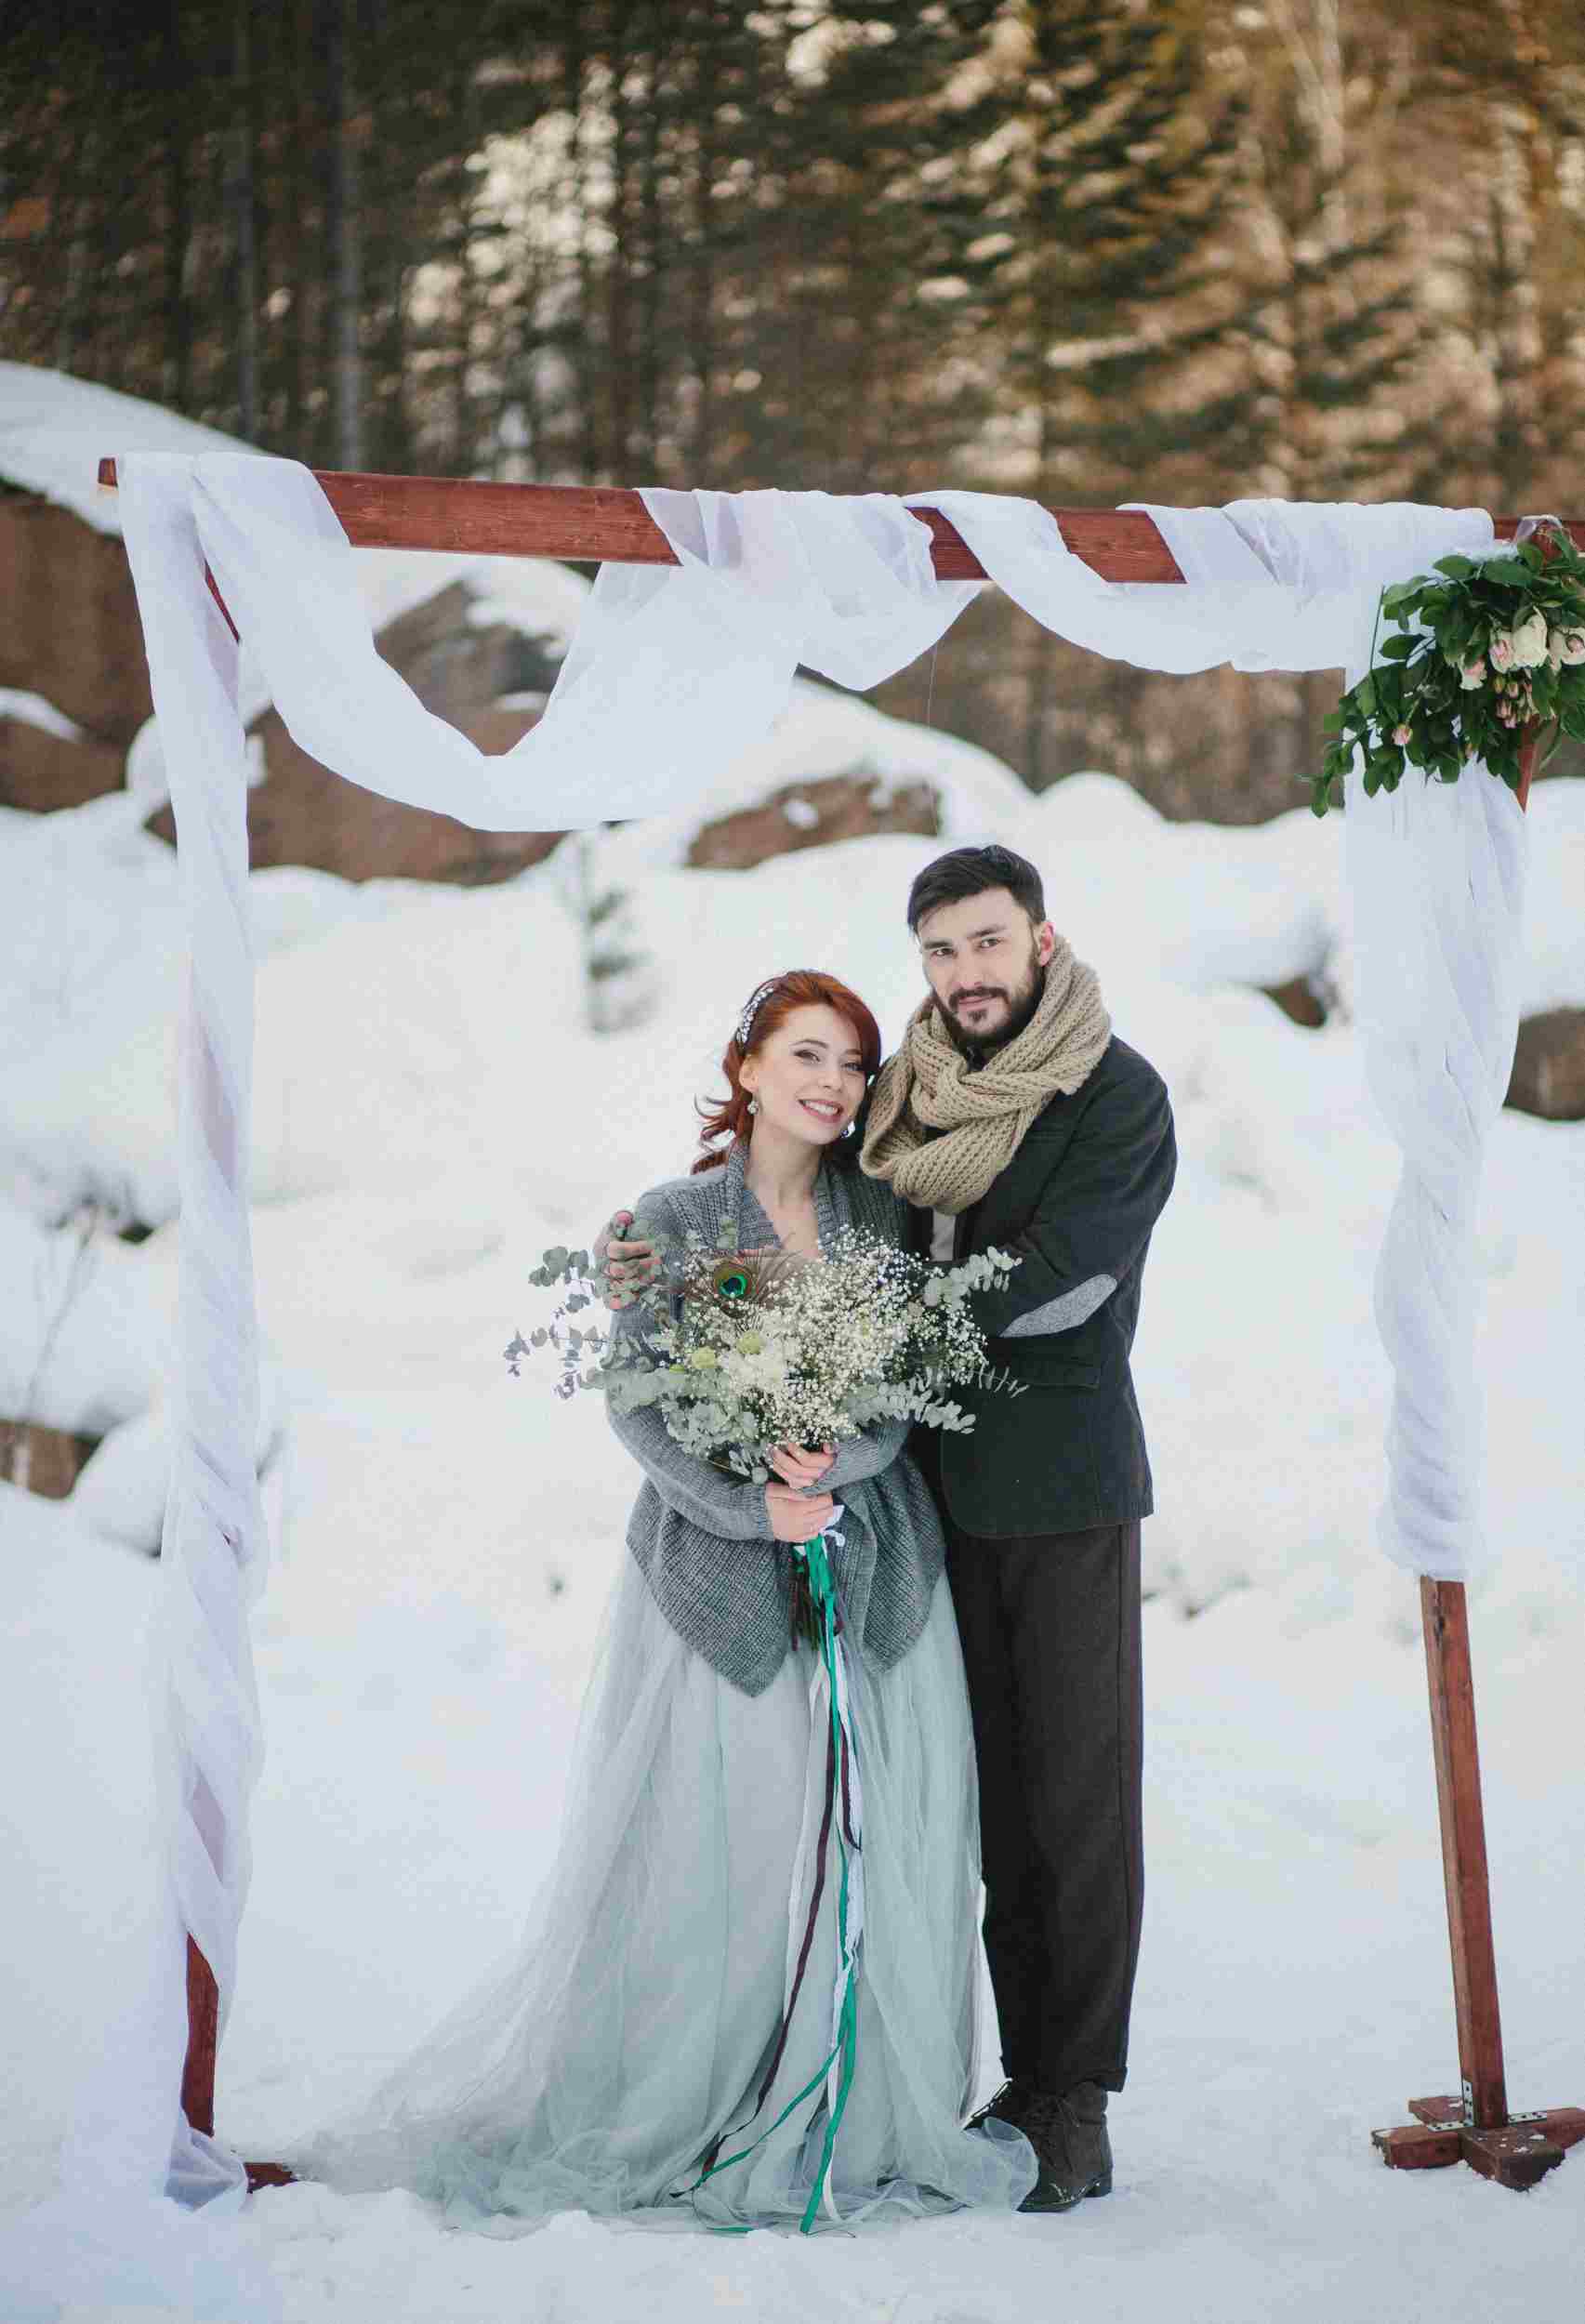 Cute Touches for a Magical Winter Wedding